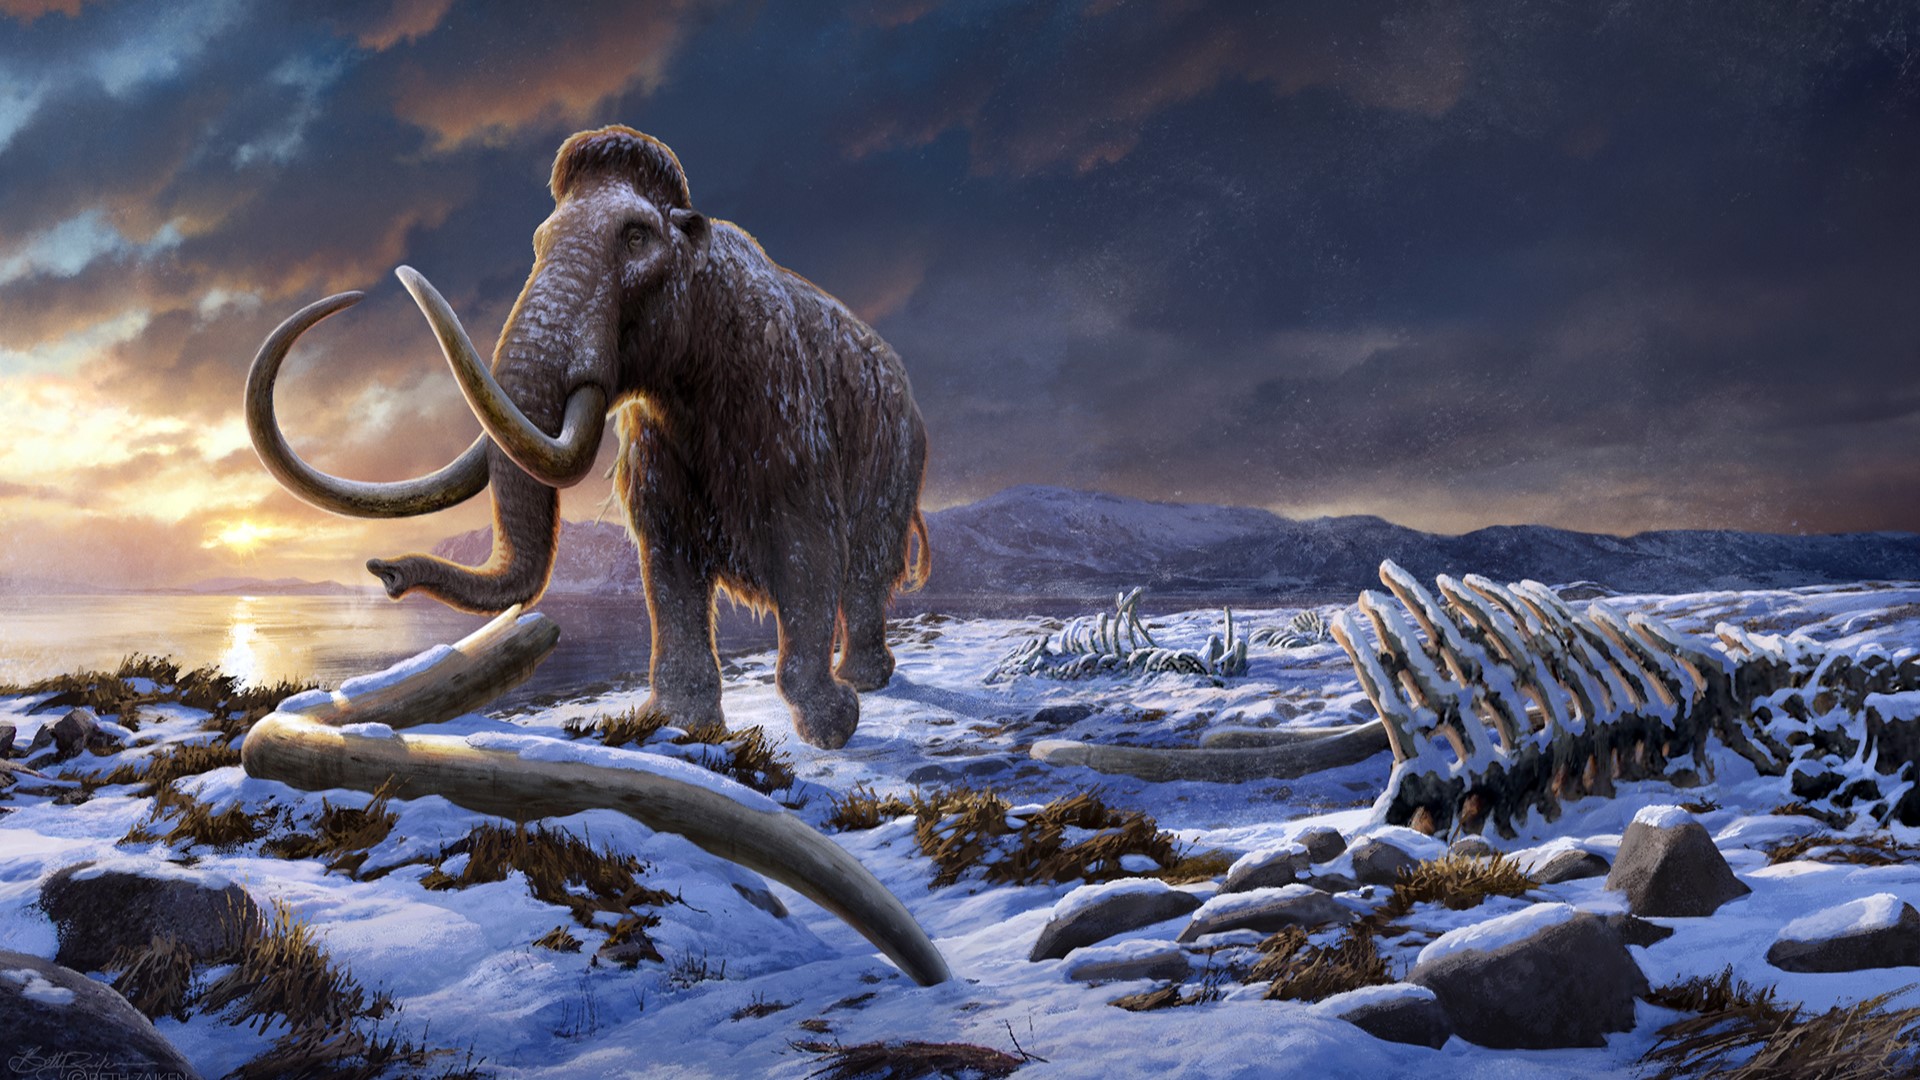  Mystery 'random event' killed off Earth's last woolly mammoths in Siberia, study claims 